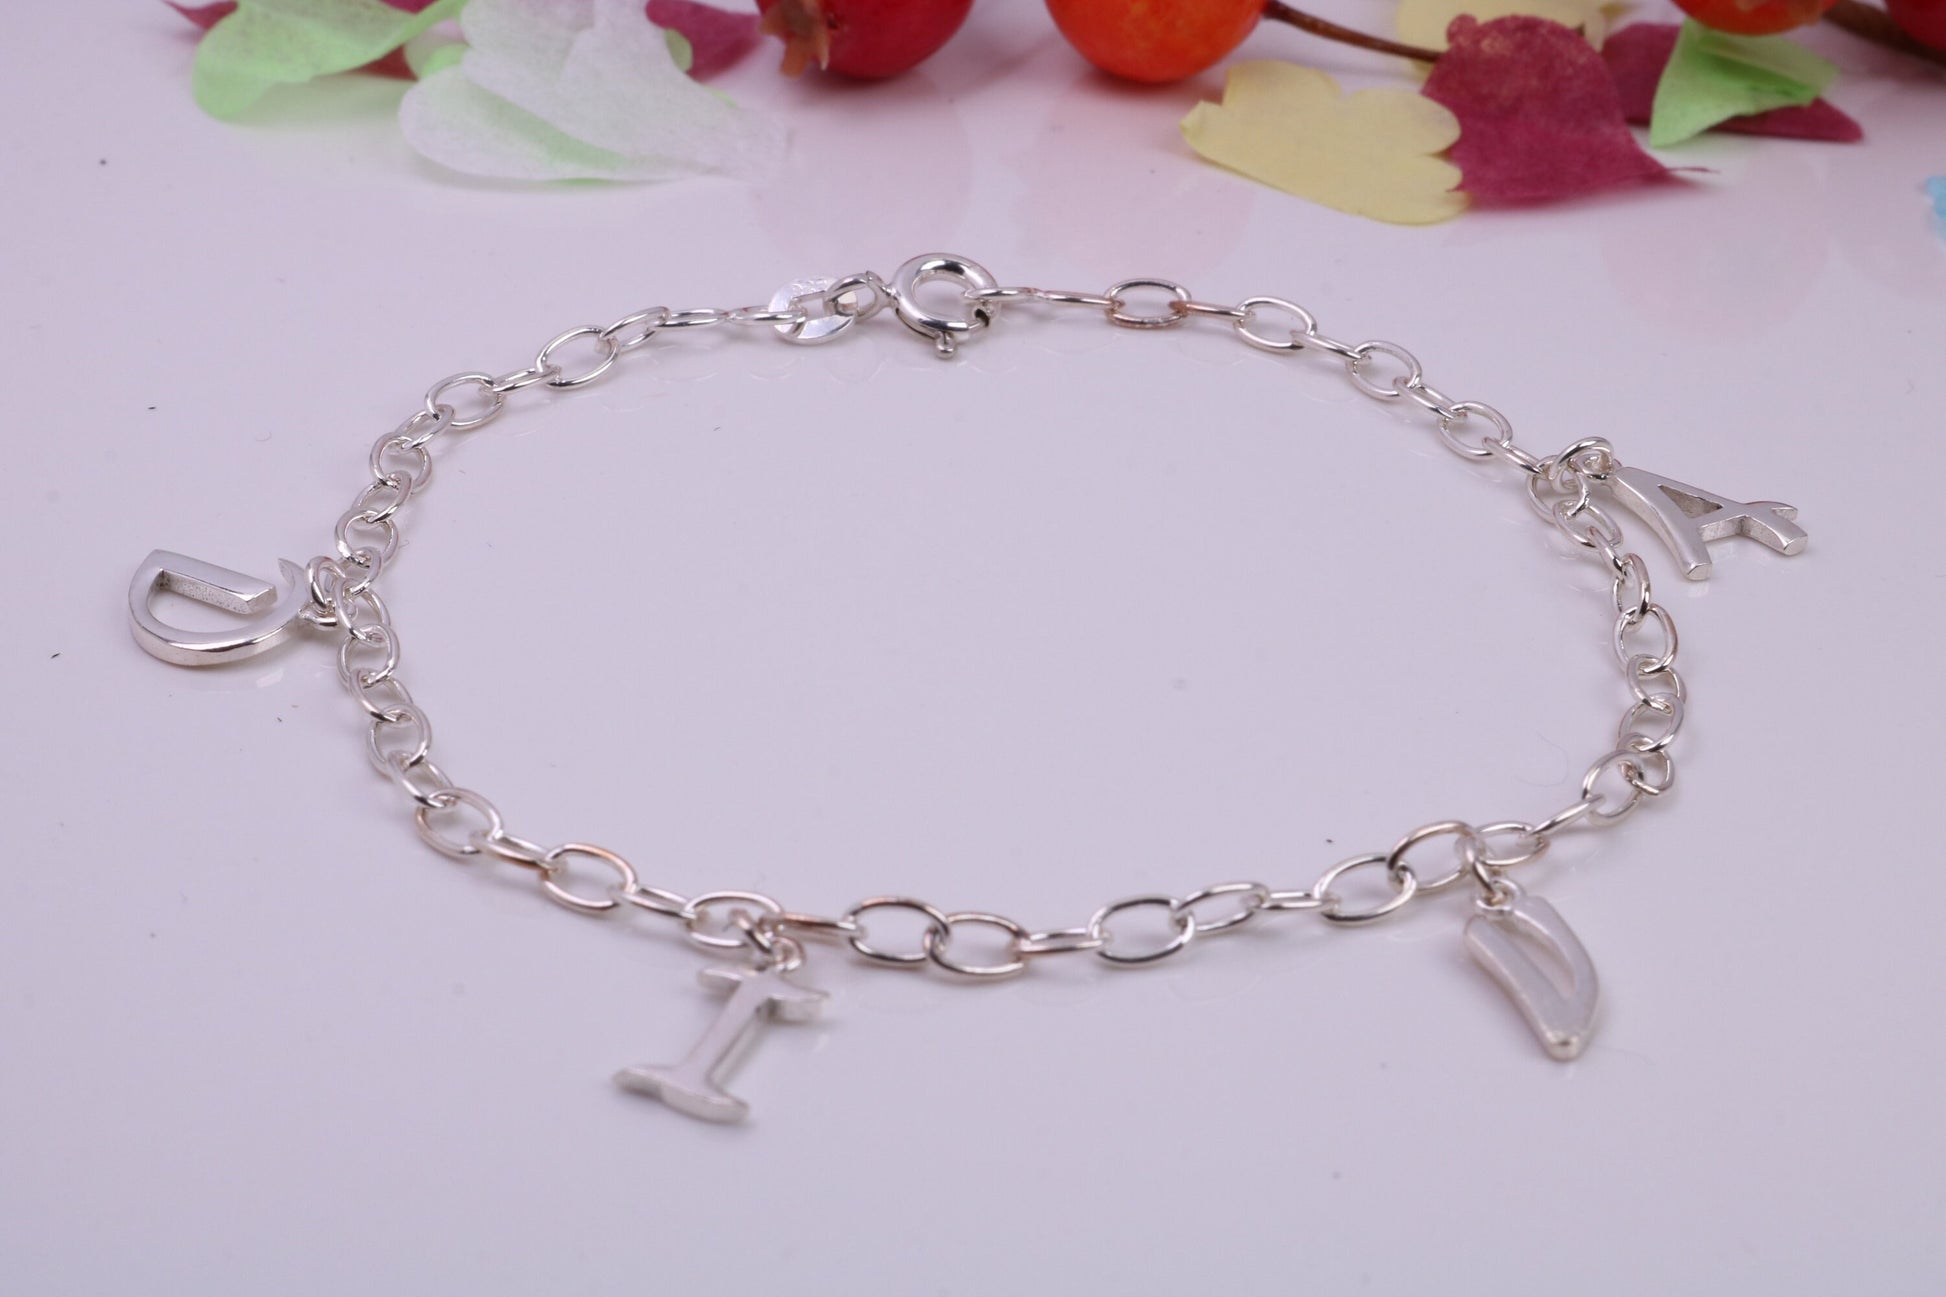 Diva Initial Bracelet Reading DIVA, made from solid Sterling Silver, 7.50 Inches Long